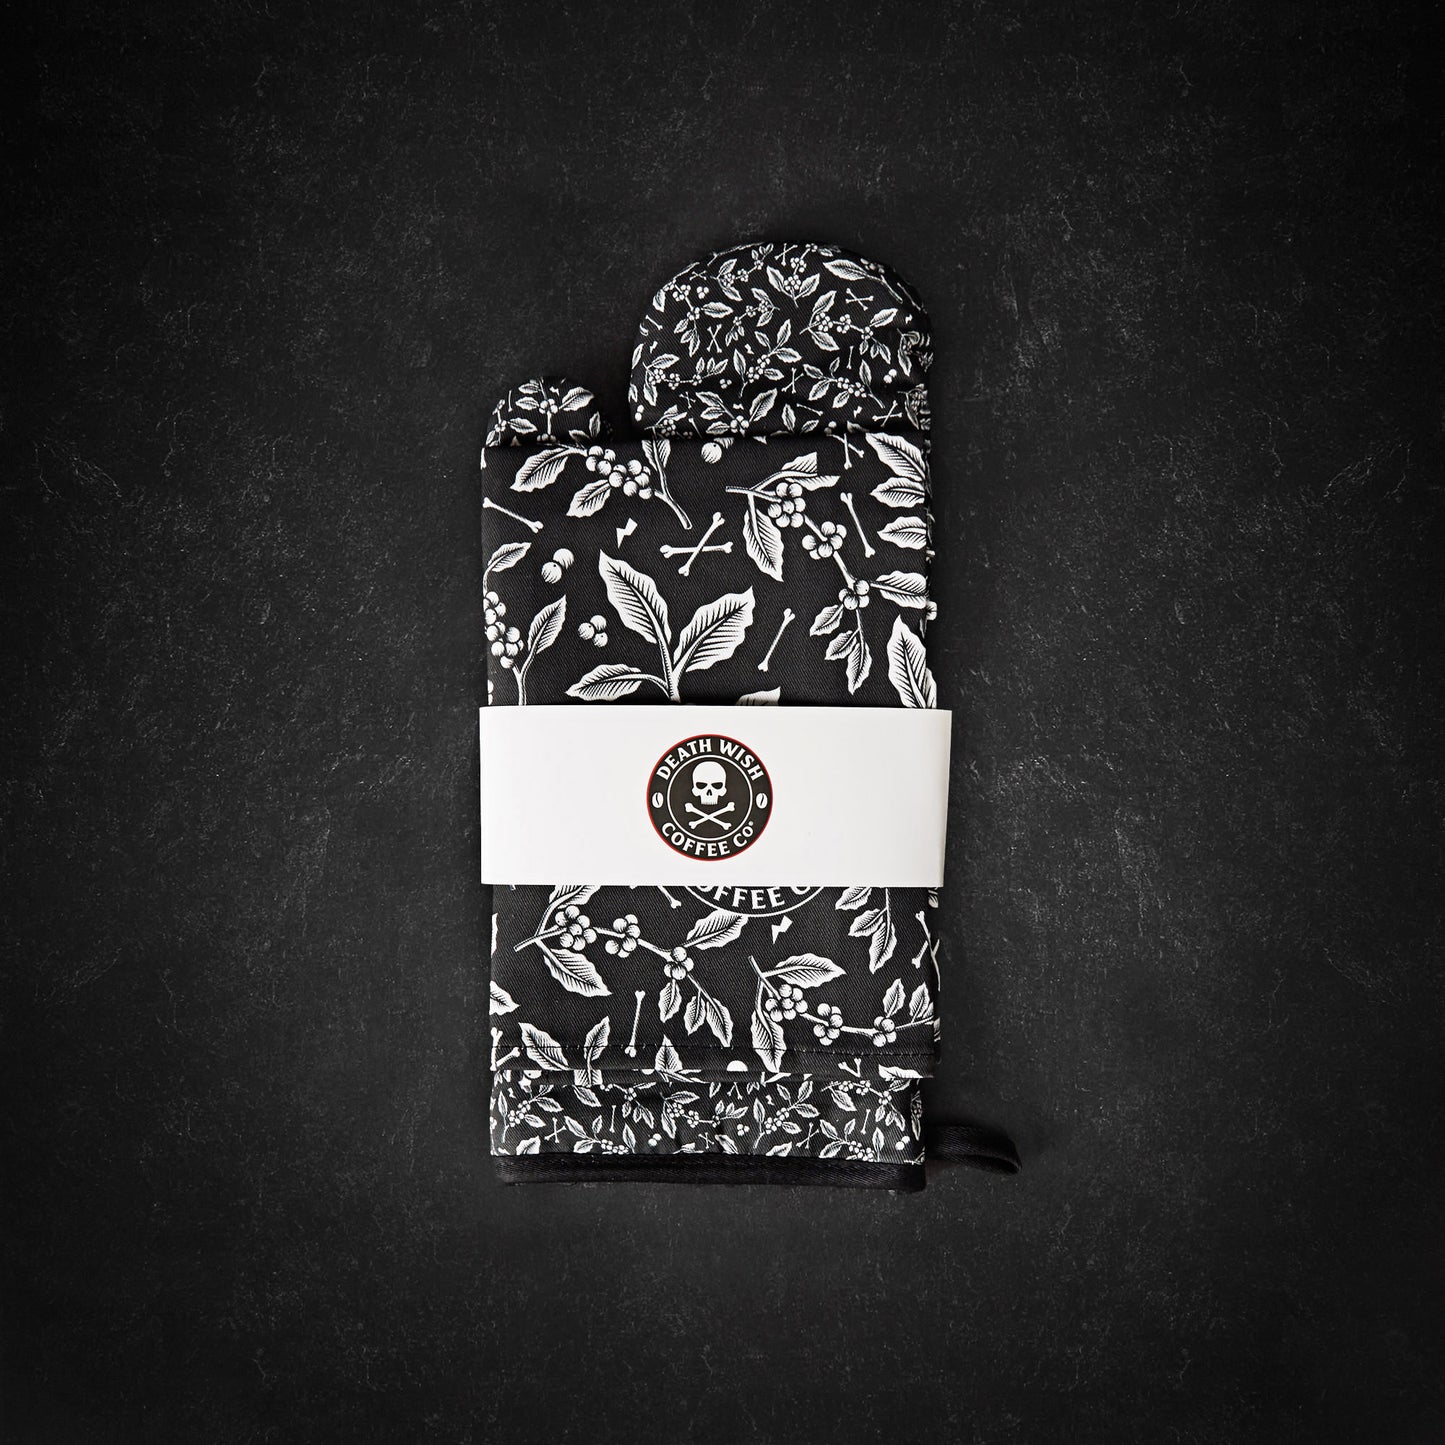 Death Wish Coffee Sacred Bloom Towel and Oven Mitt - Packaged Together